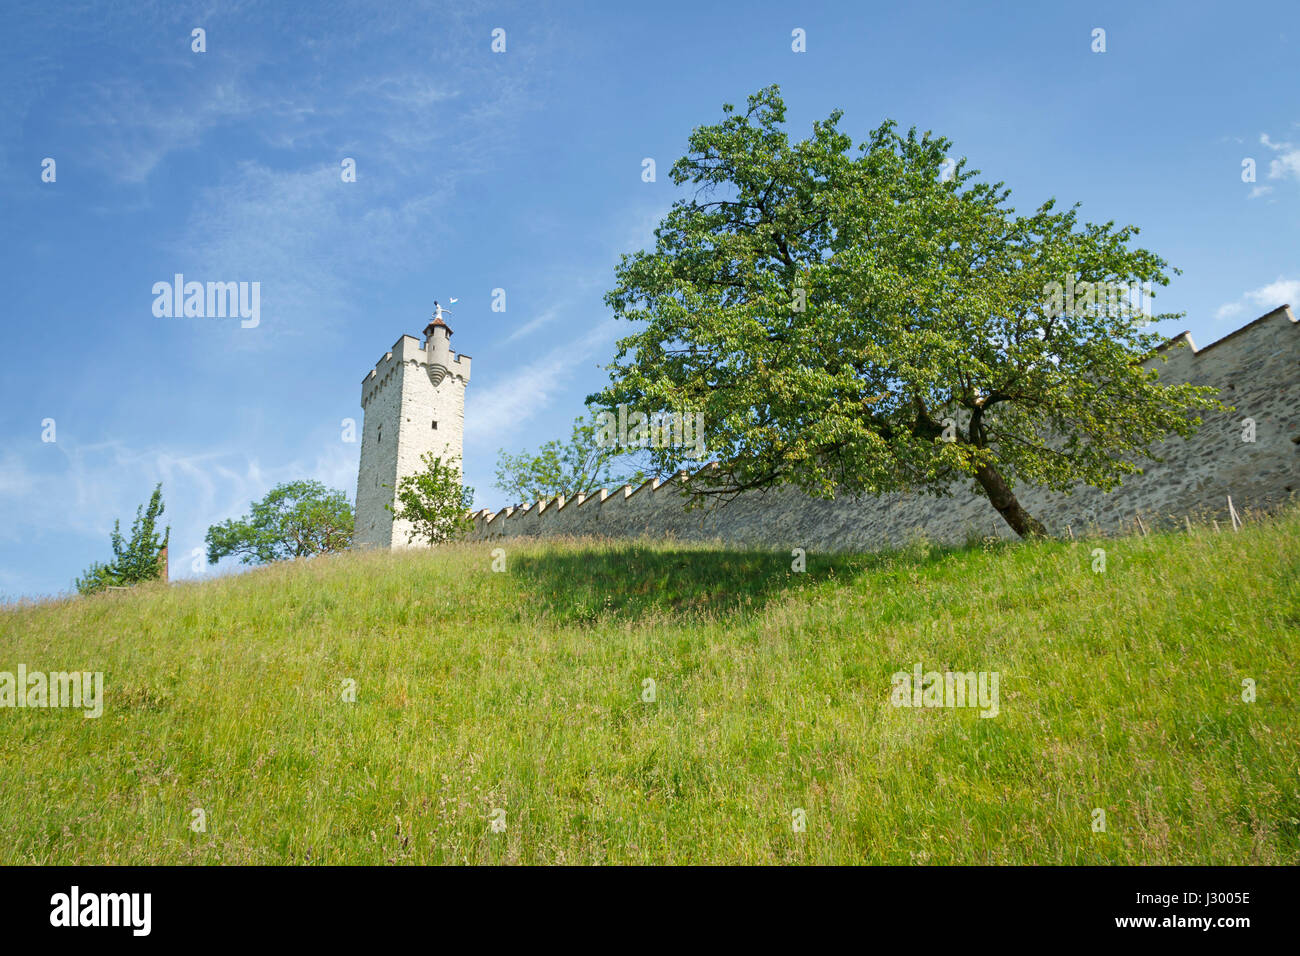 The old city walls and towers (Musegg Wall) of Lucerne, Switzerland Stock Photo